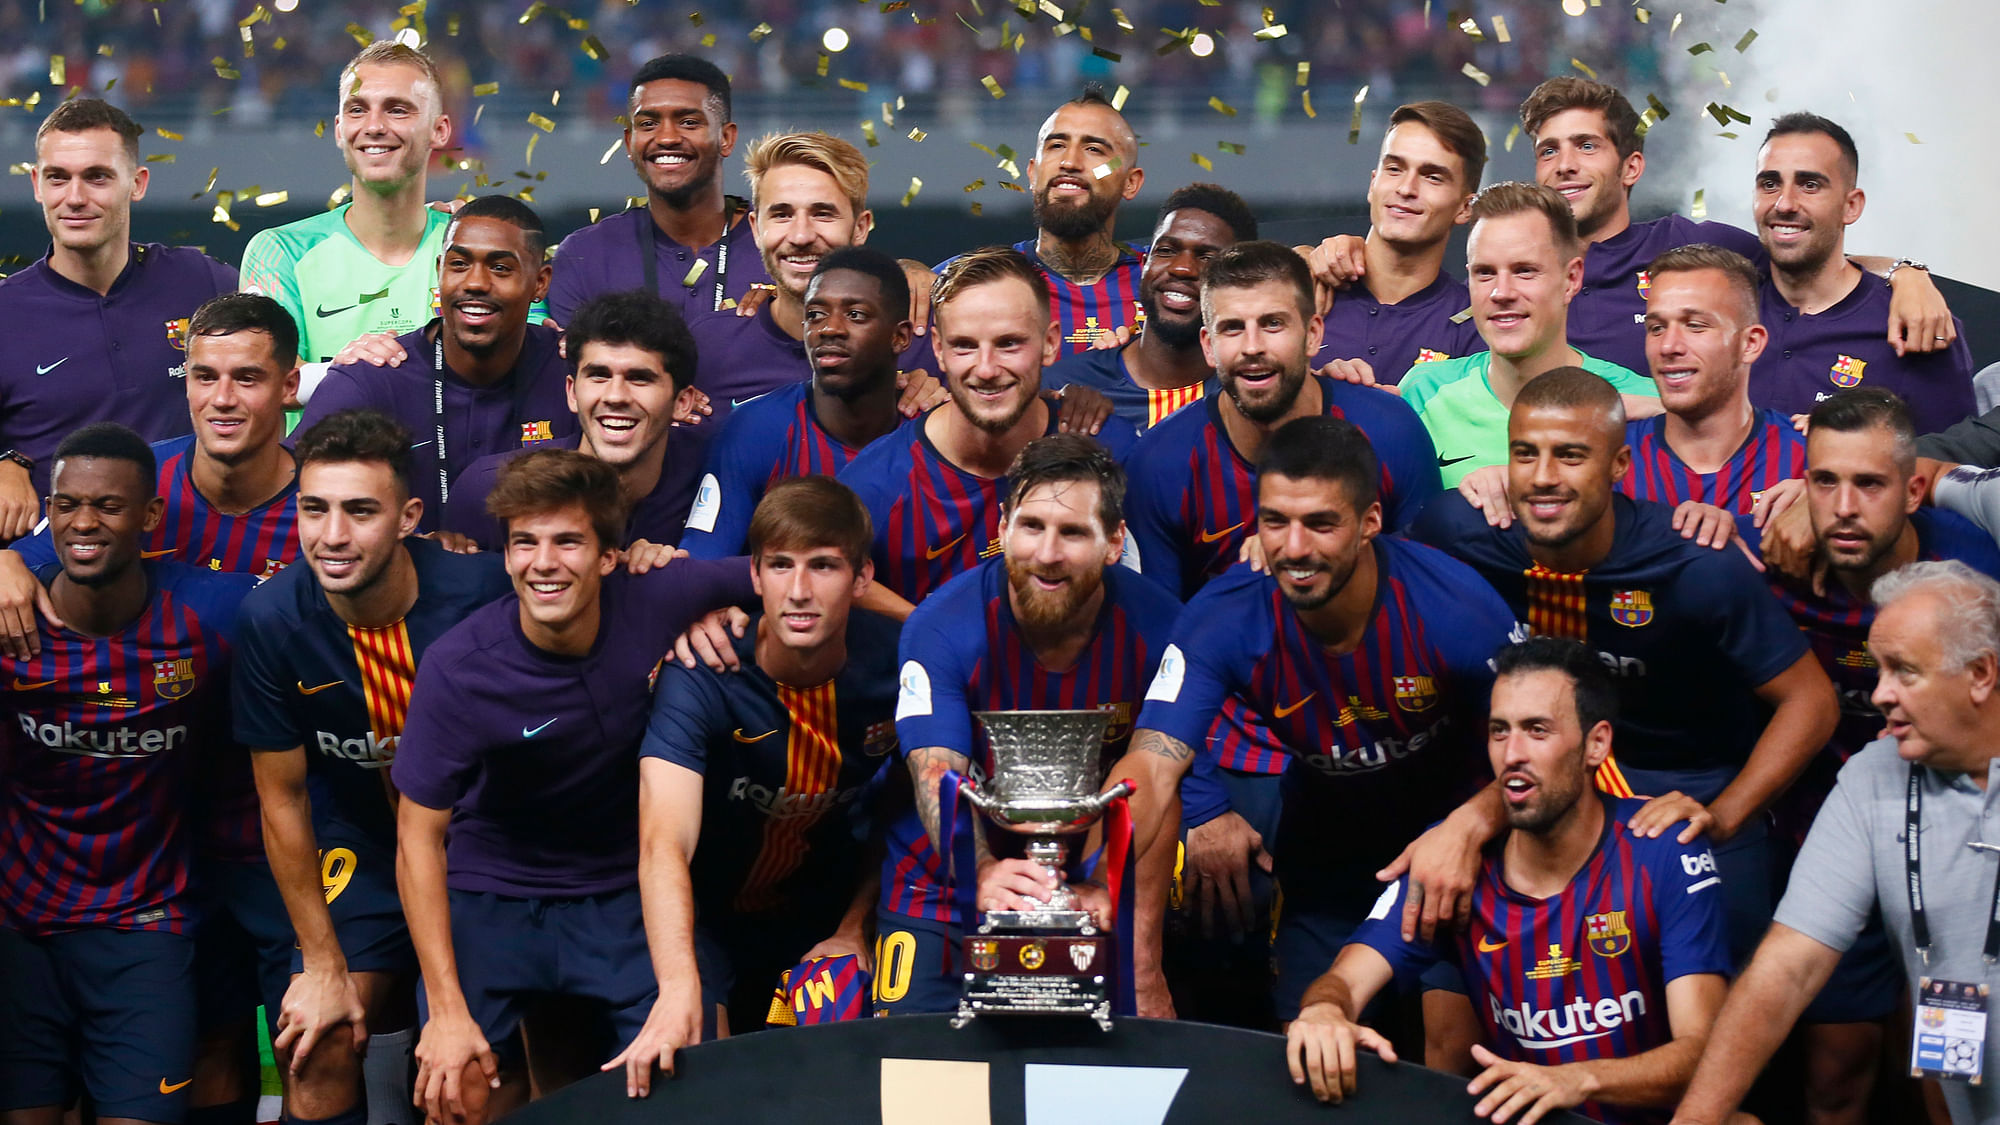 Barcelona players pose with the trophy after winning the Spanish Super Cup soccer match between Sevilla and Barcelona in Tangier, Morocco, Sunday, Aug. 12, 2018. Barcelona won 2-1.&nbsp;